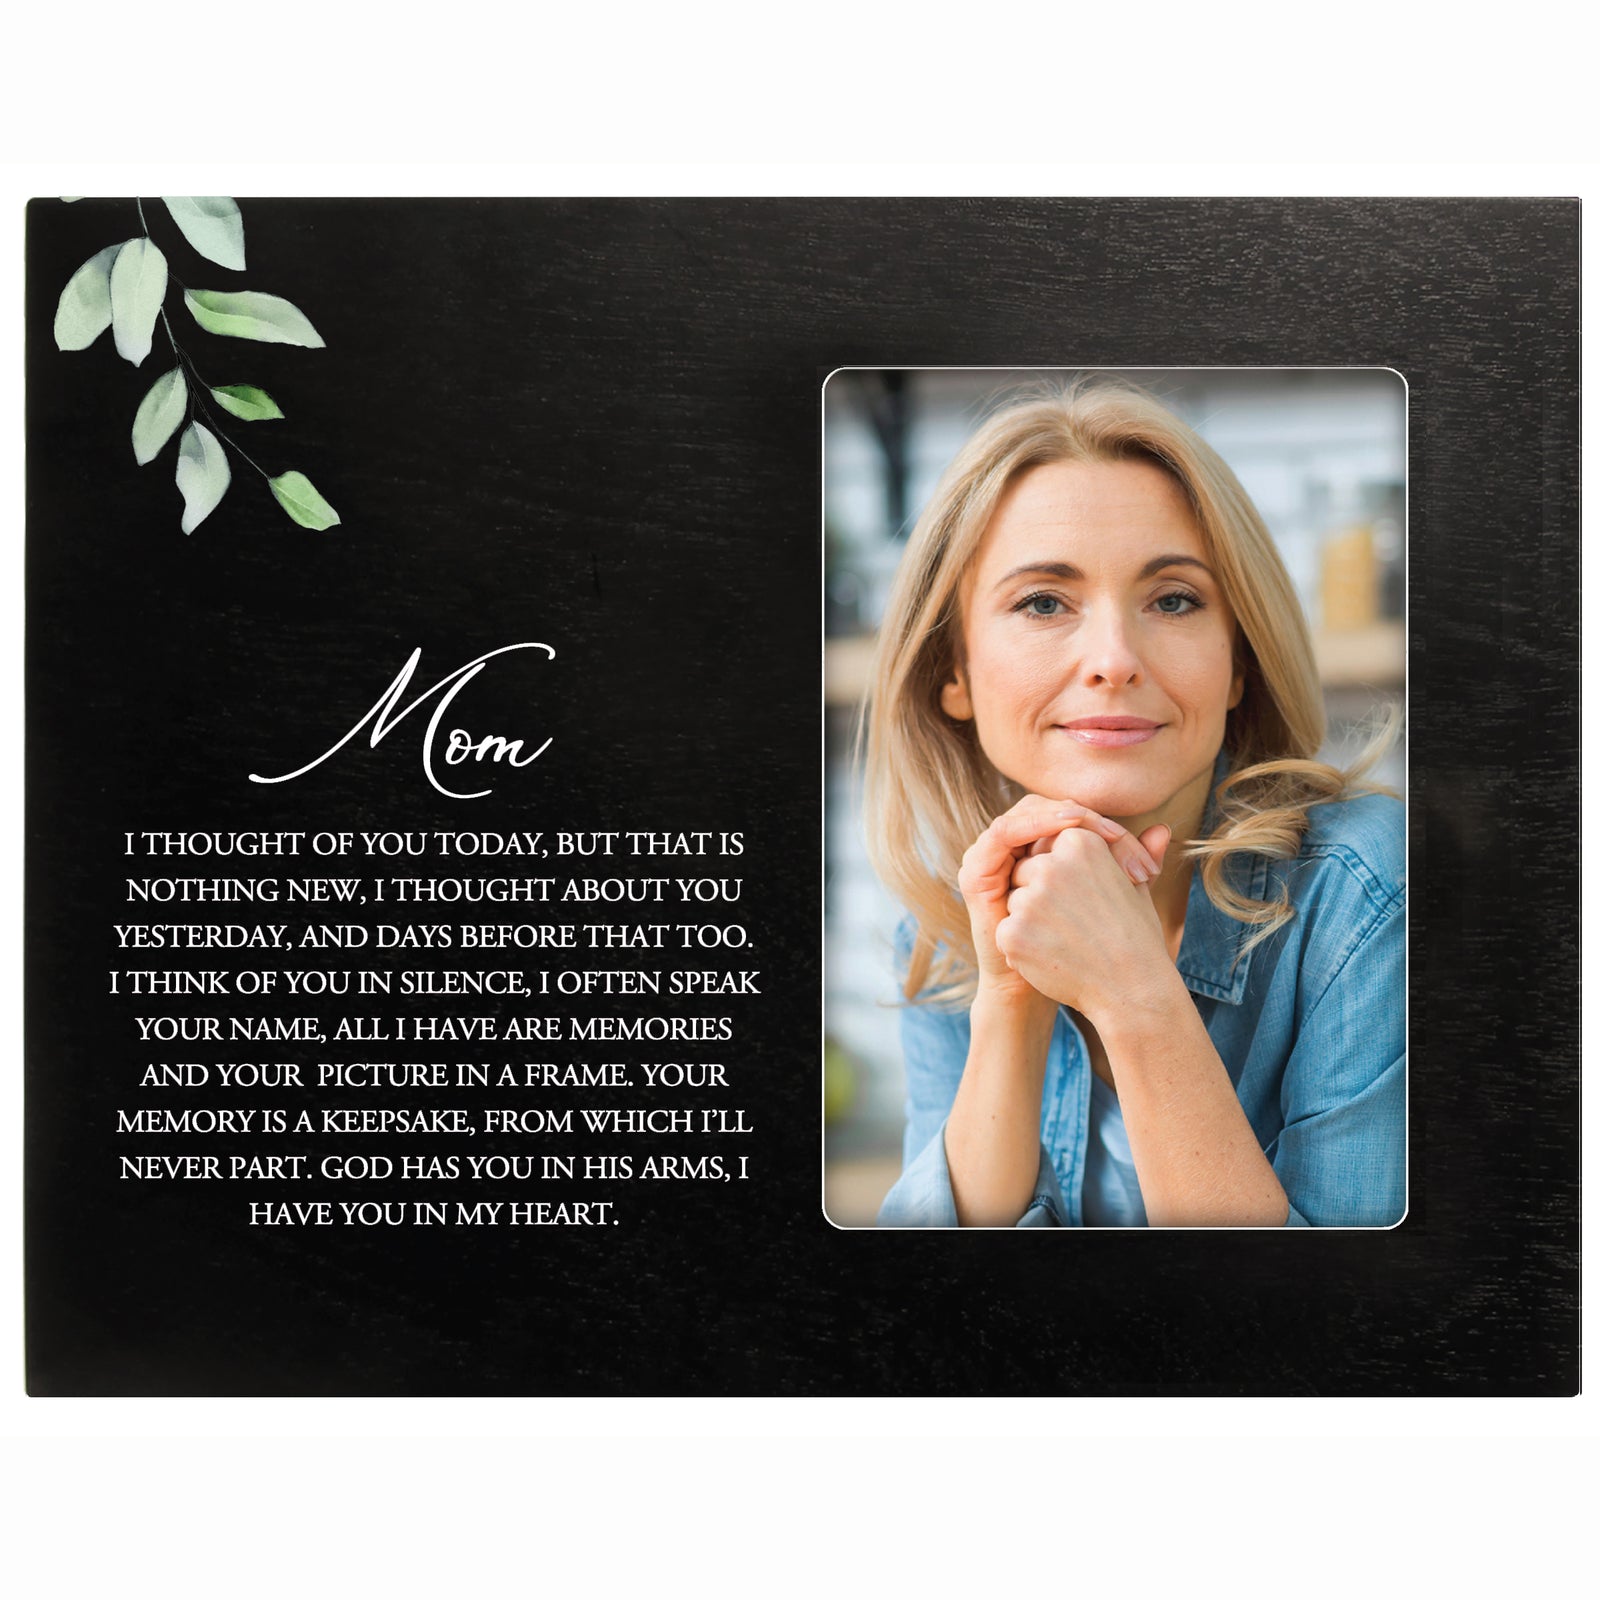 Sentimental Human Memorial Photo Frame Gift Bereavement Gift Idea - Mom I thought of you